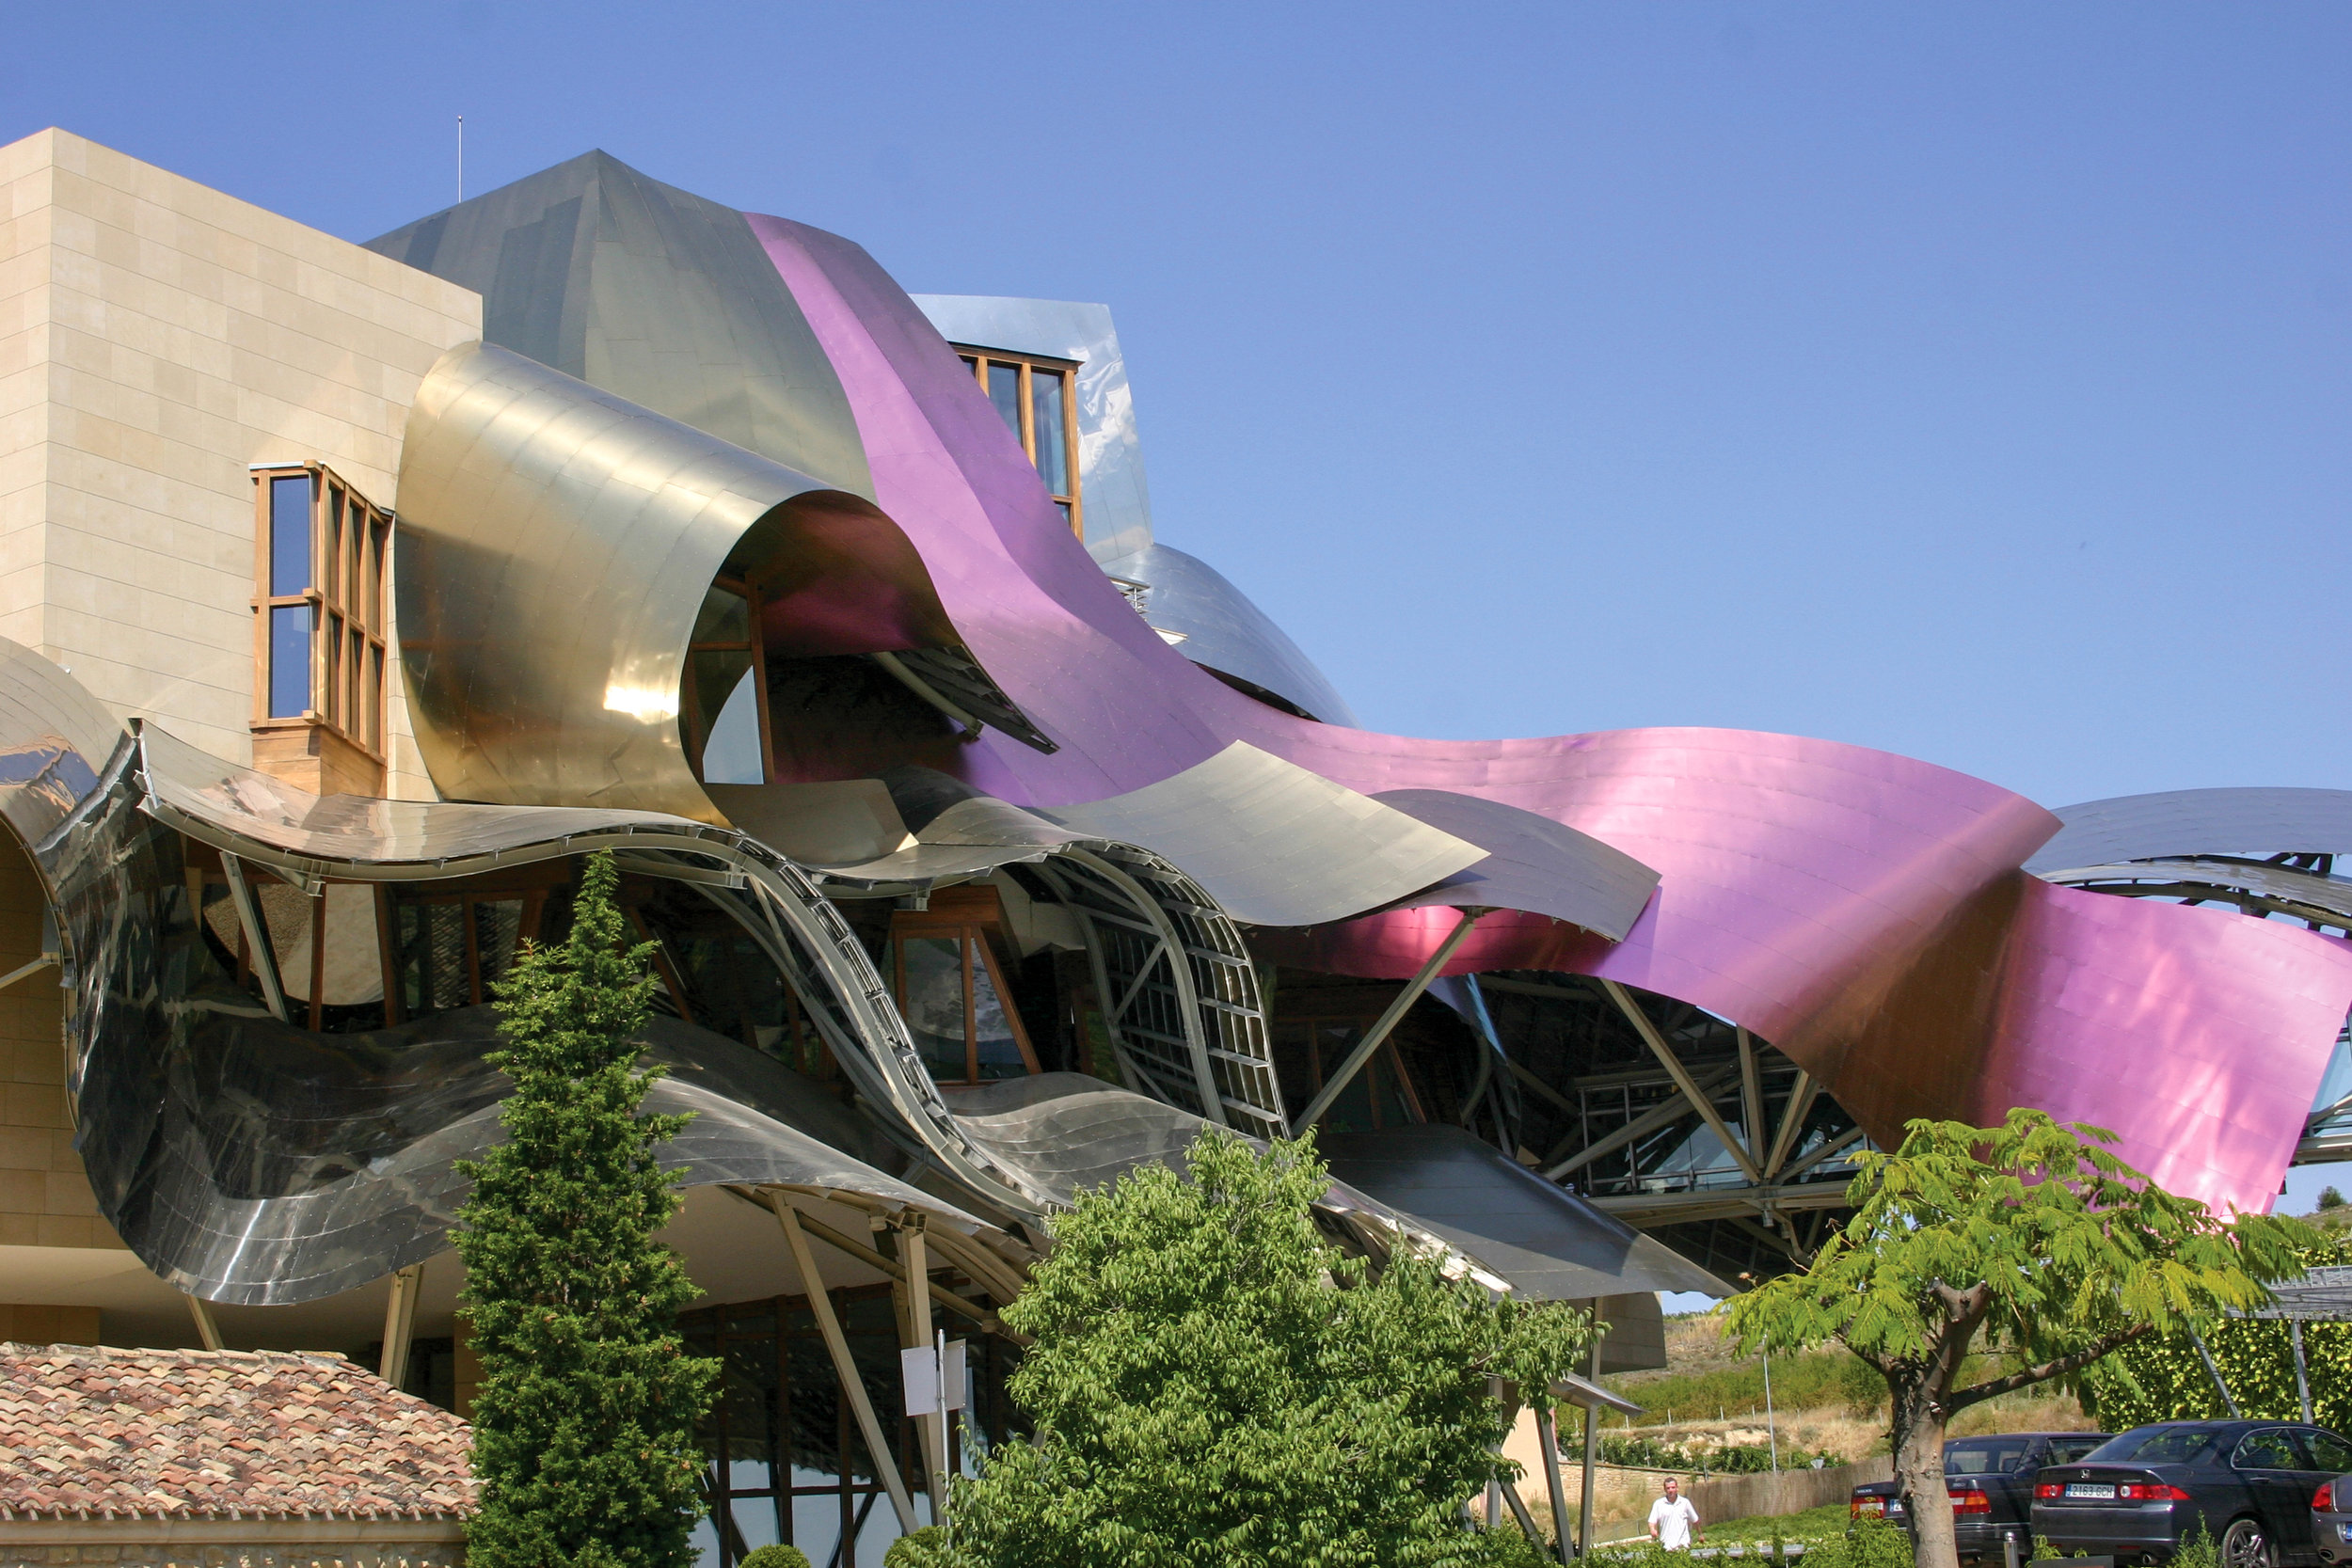 Marques de Riscal Hotel - Frank Gehry